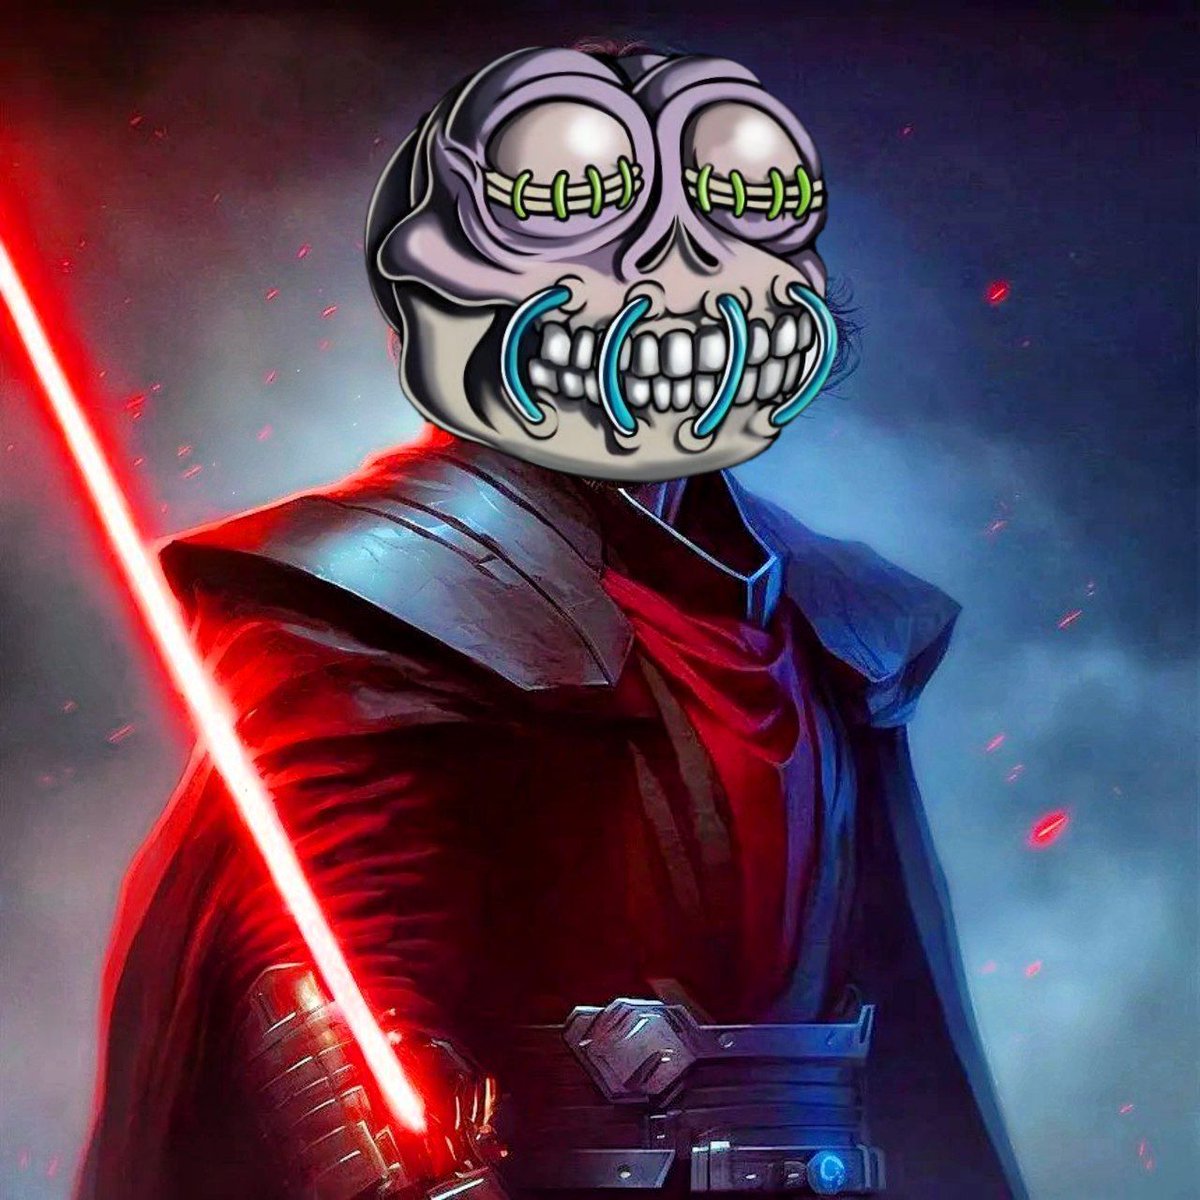 Happy 4 of may! 
Lord Megadeth has come to live his 4 life after manny takeovers.
Ca: A4jgPEKftbQewQwEoUtMprusJpLEGx6YLurusi7XtA39

@Matt_Furie @megadethCTO

#Megadeth #Solana #PepeKiller #StarWars #MayTheFourthBeWithYou